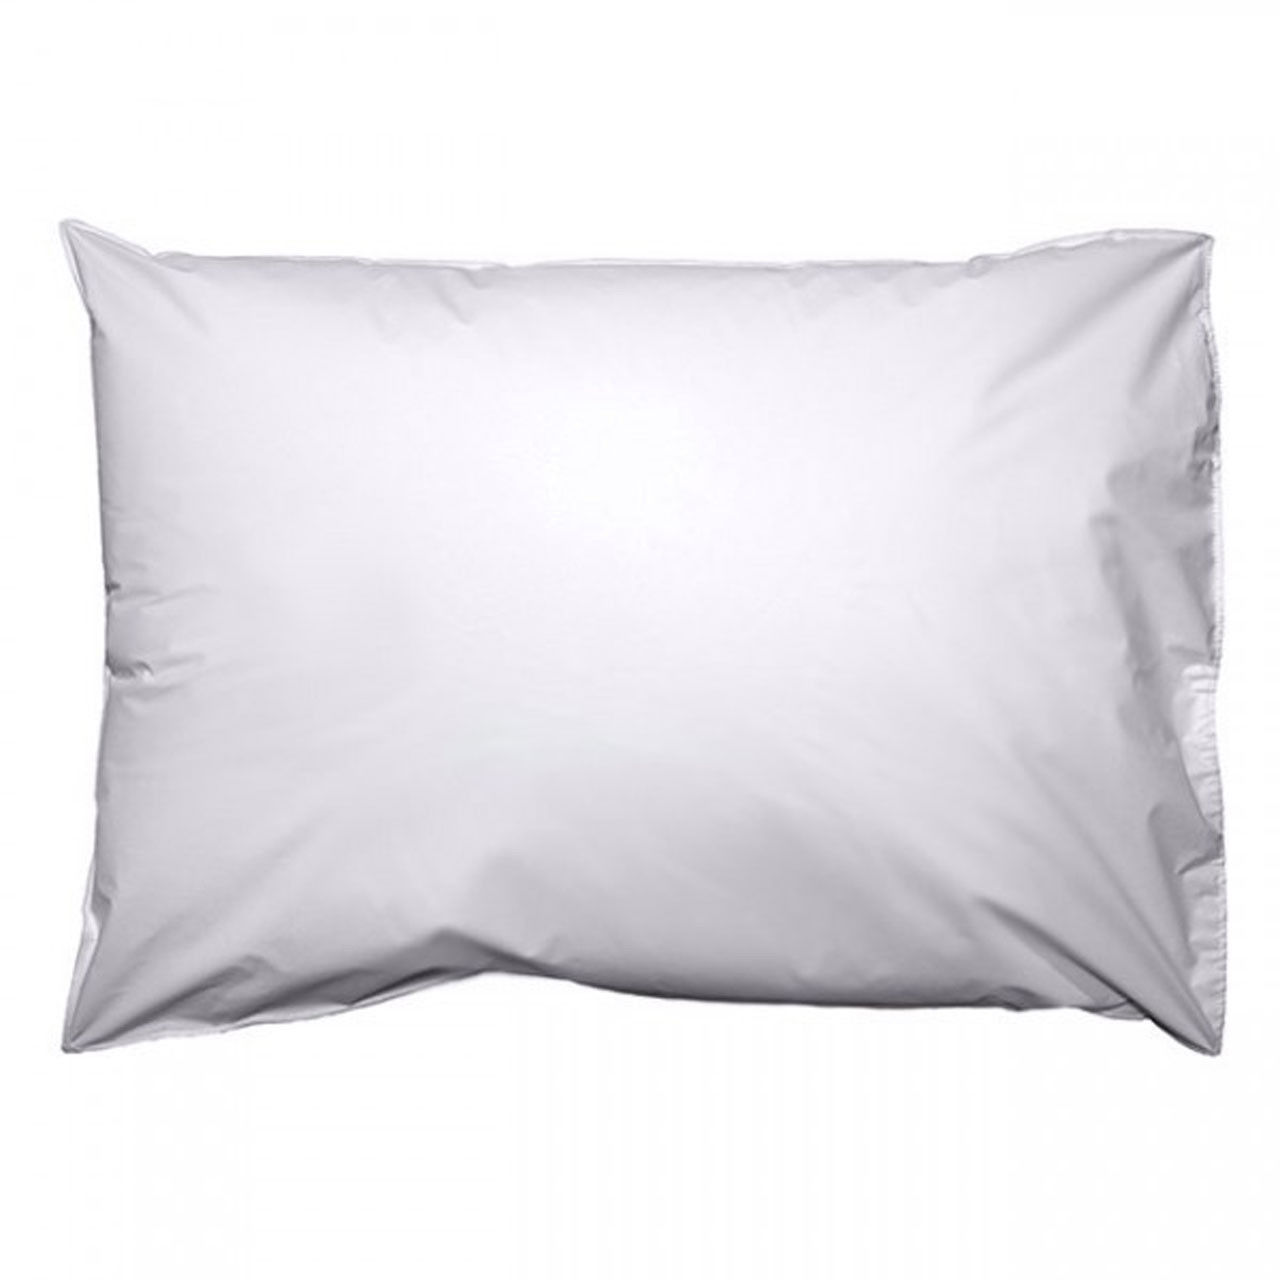 What type of material is used for the cover of our standard wipeable pillows?